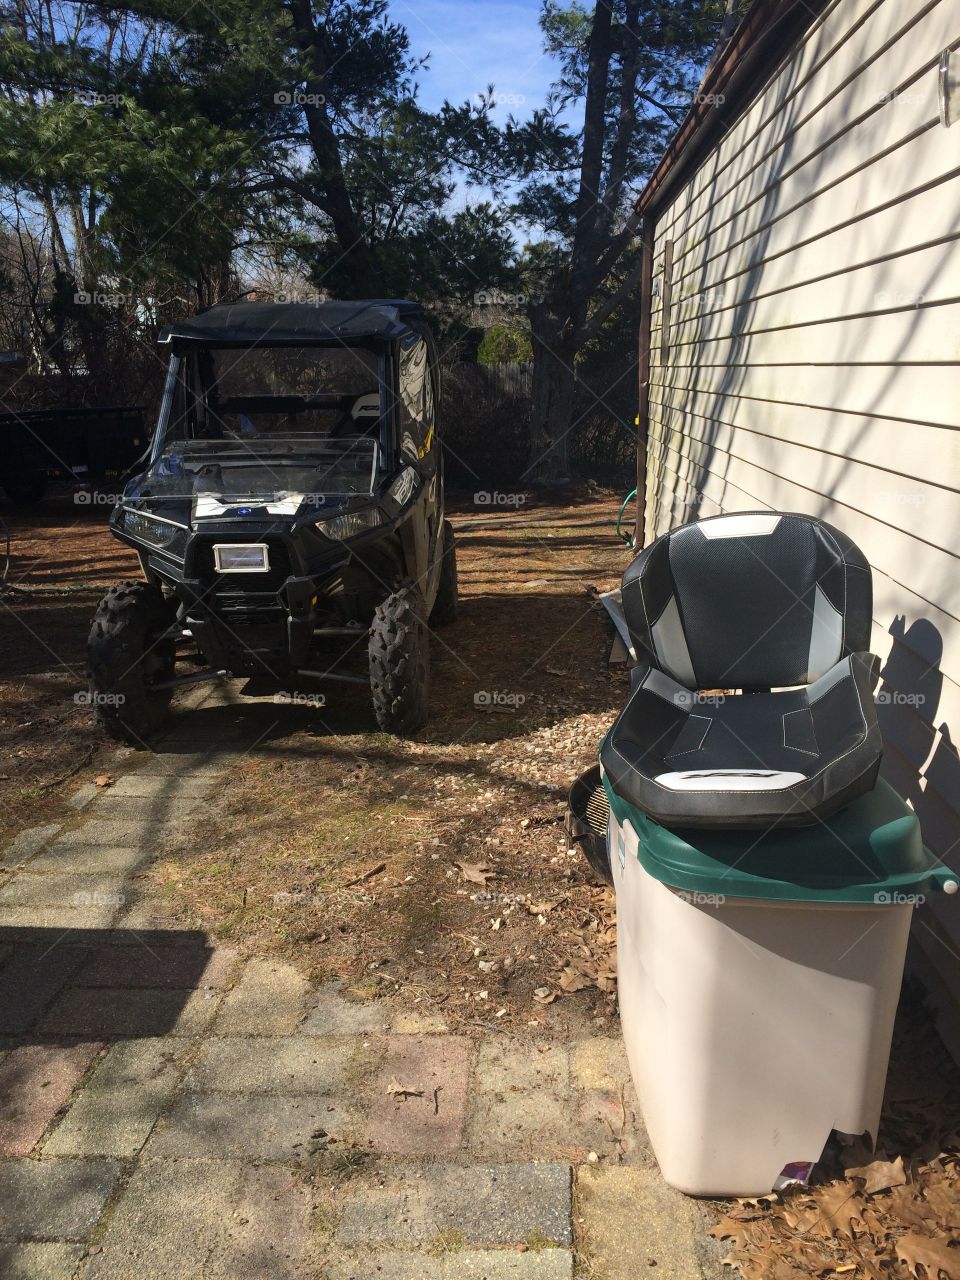 Letting the seat dry out in the warm NJ sunshine. Gotta enjoy that when you can. 